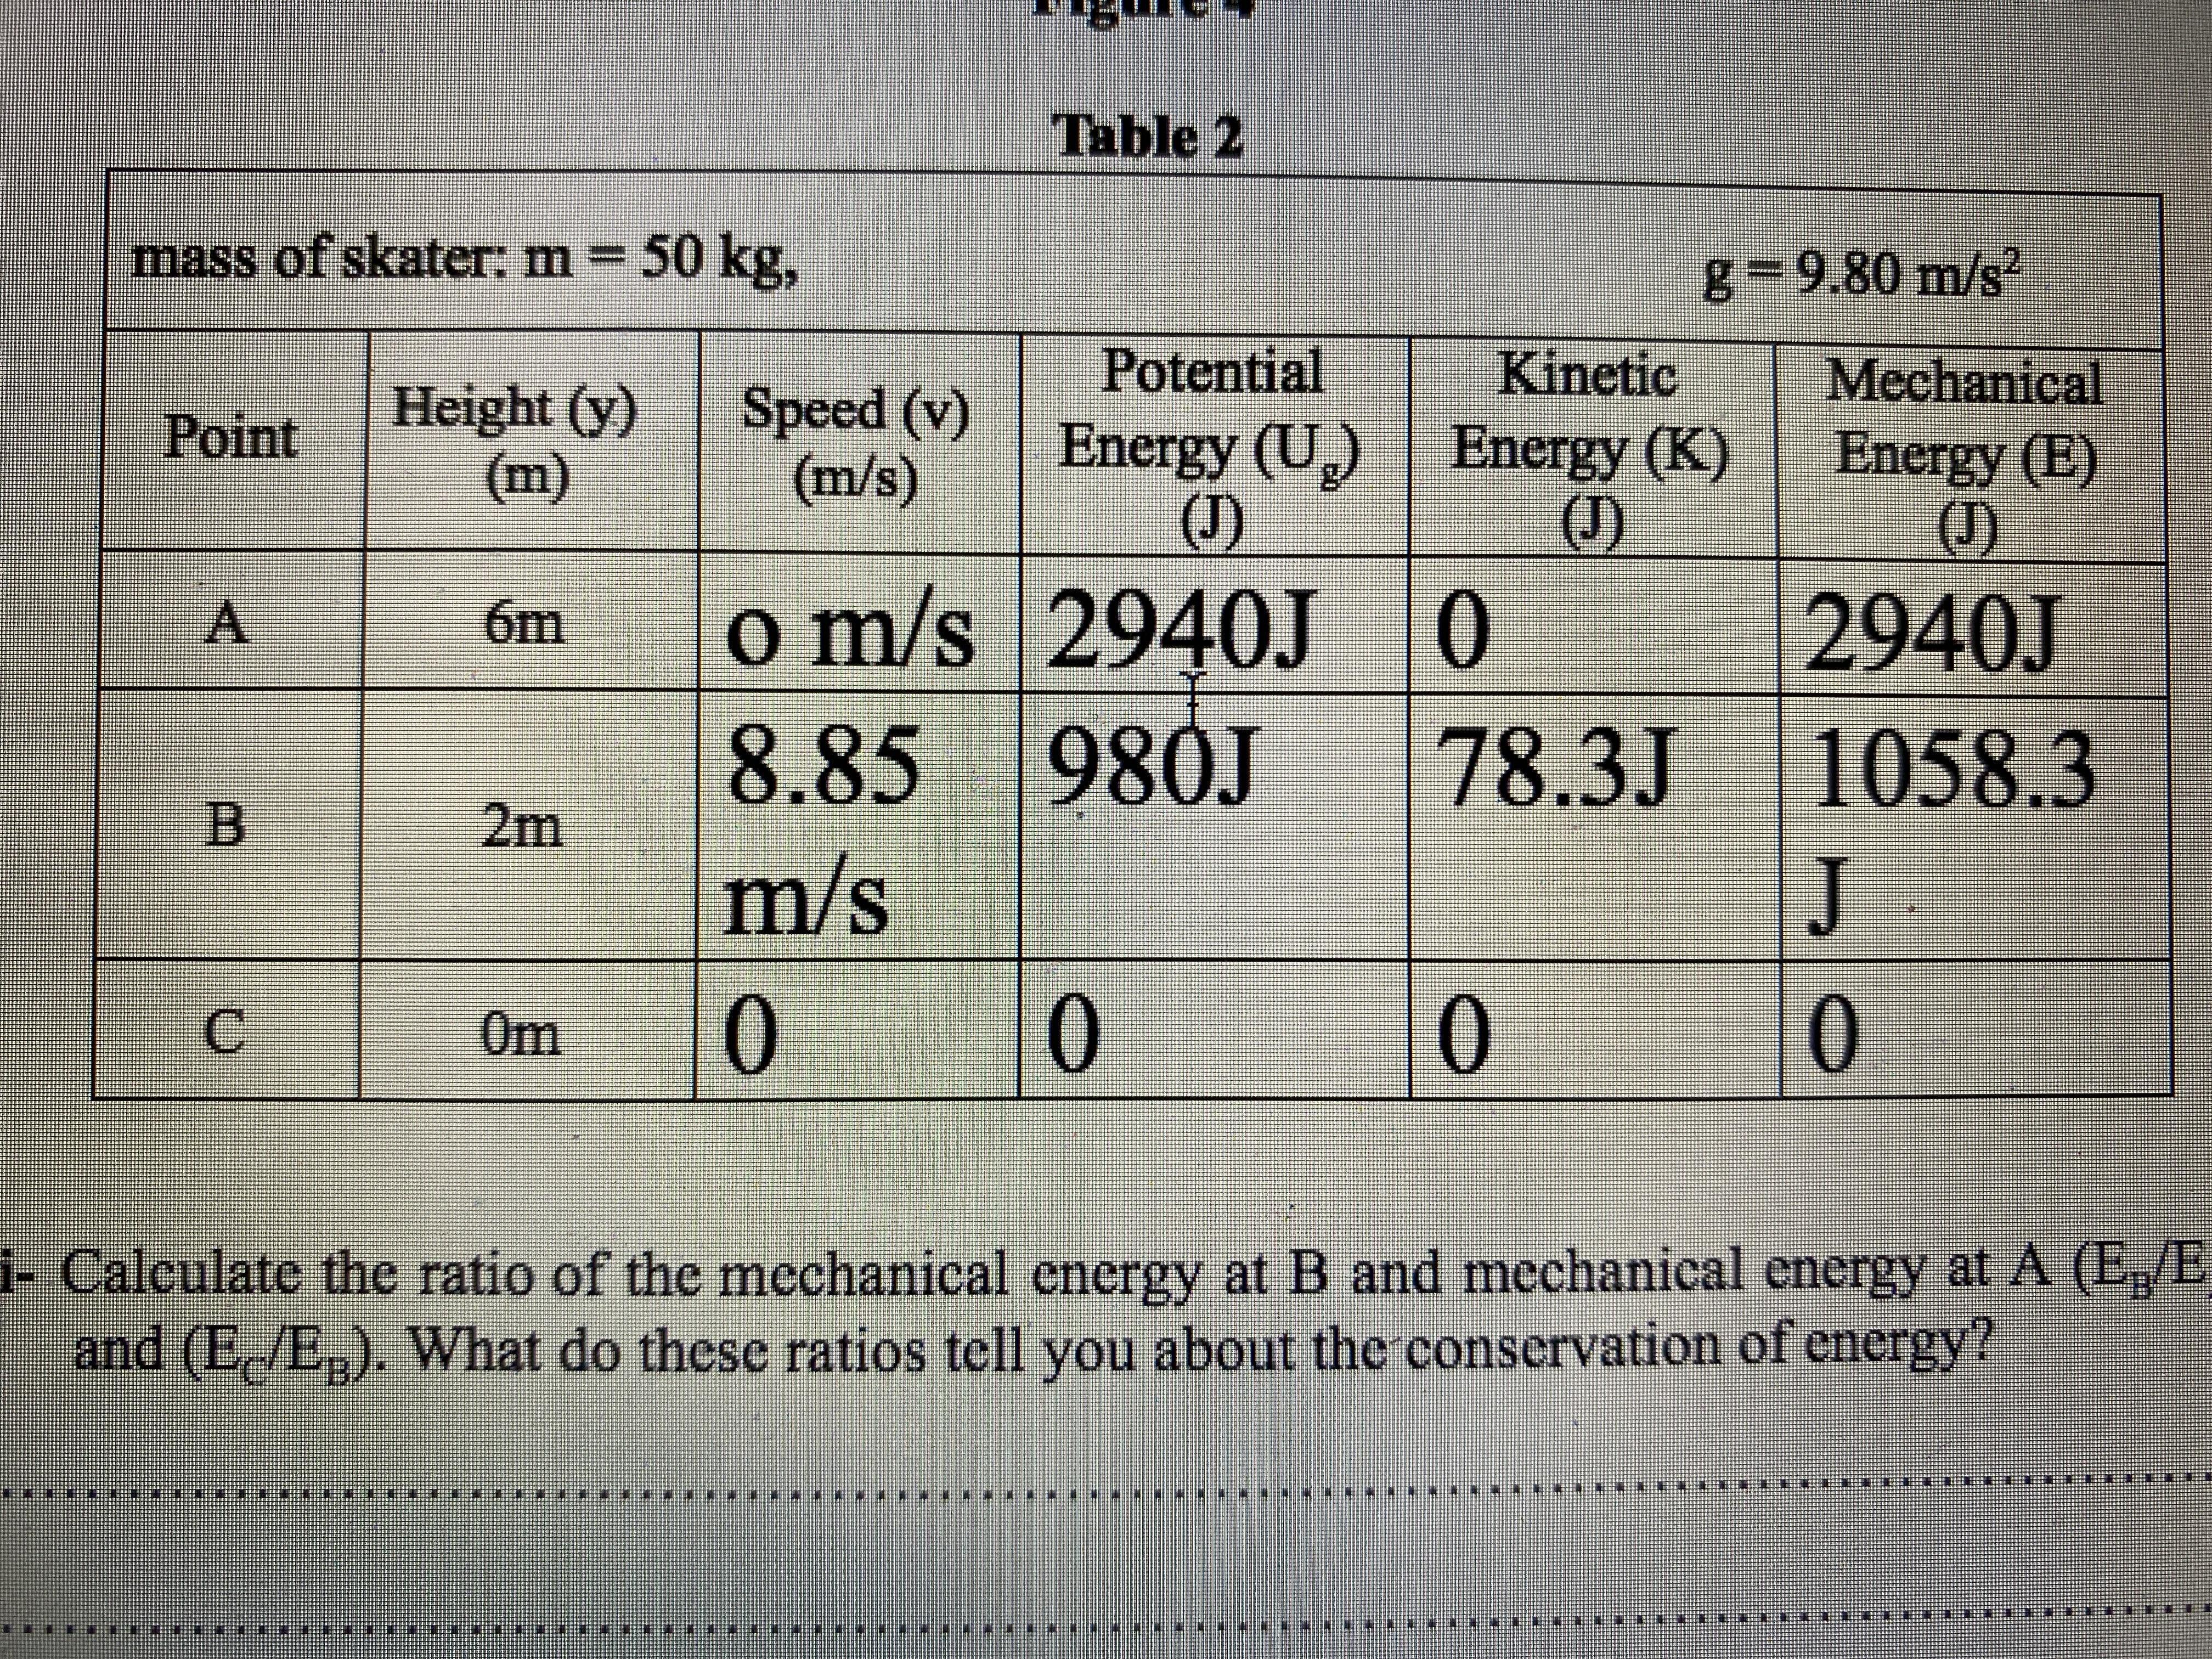 Calculate The Ratio Of The Mechanical Energy At B And Mechanical Energy At A (eb,ea) And (ec,ea). What